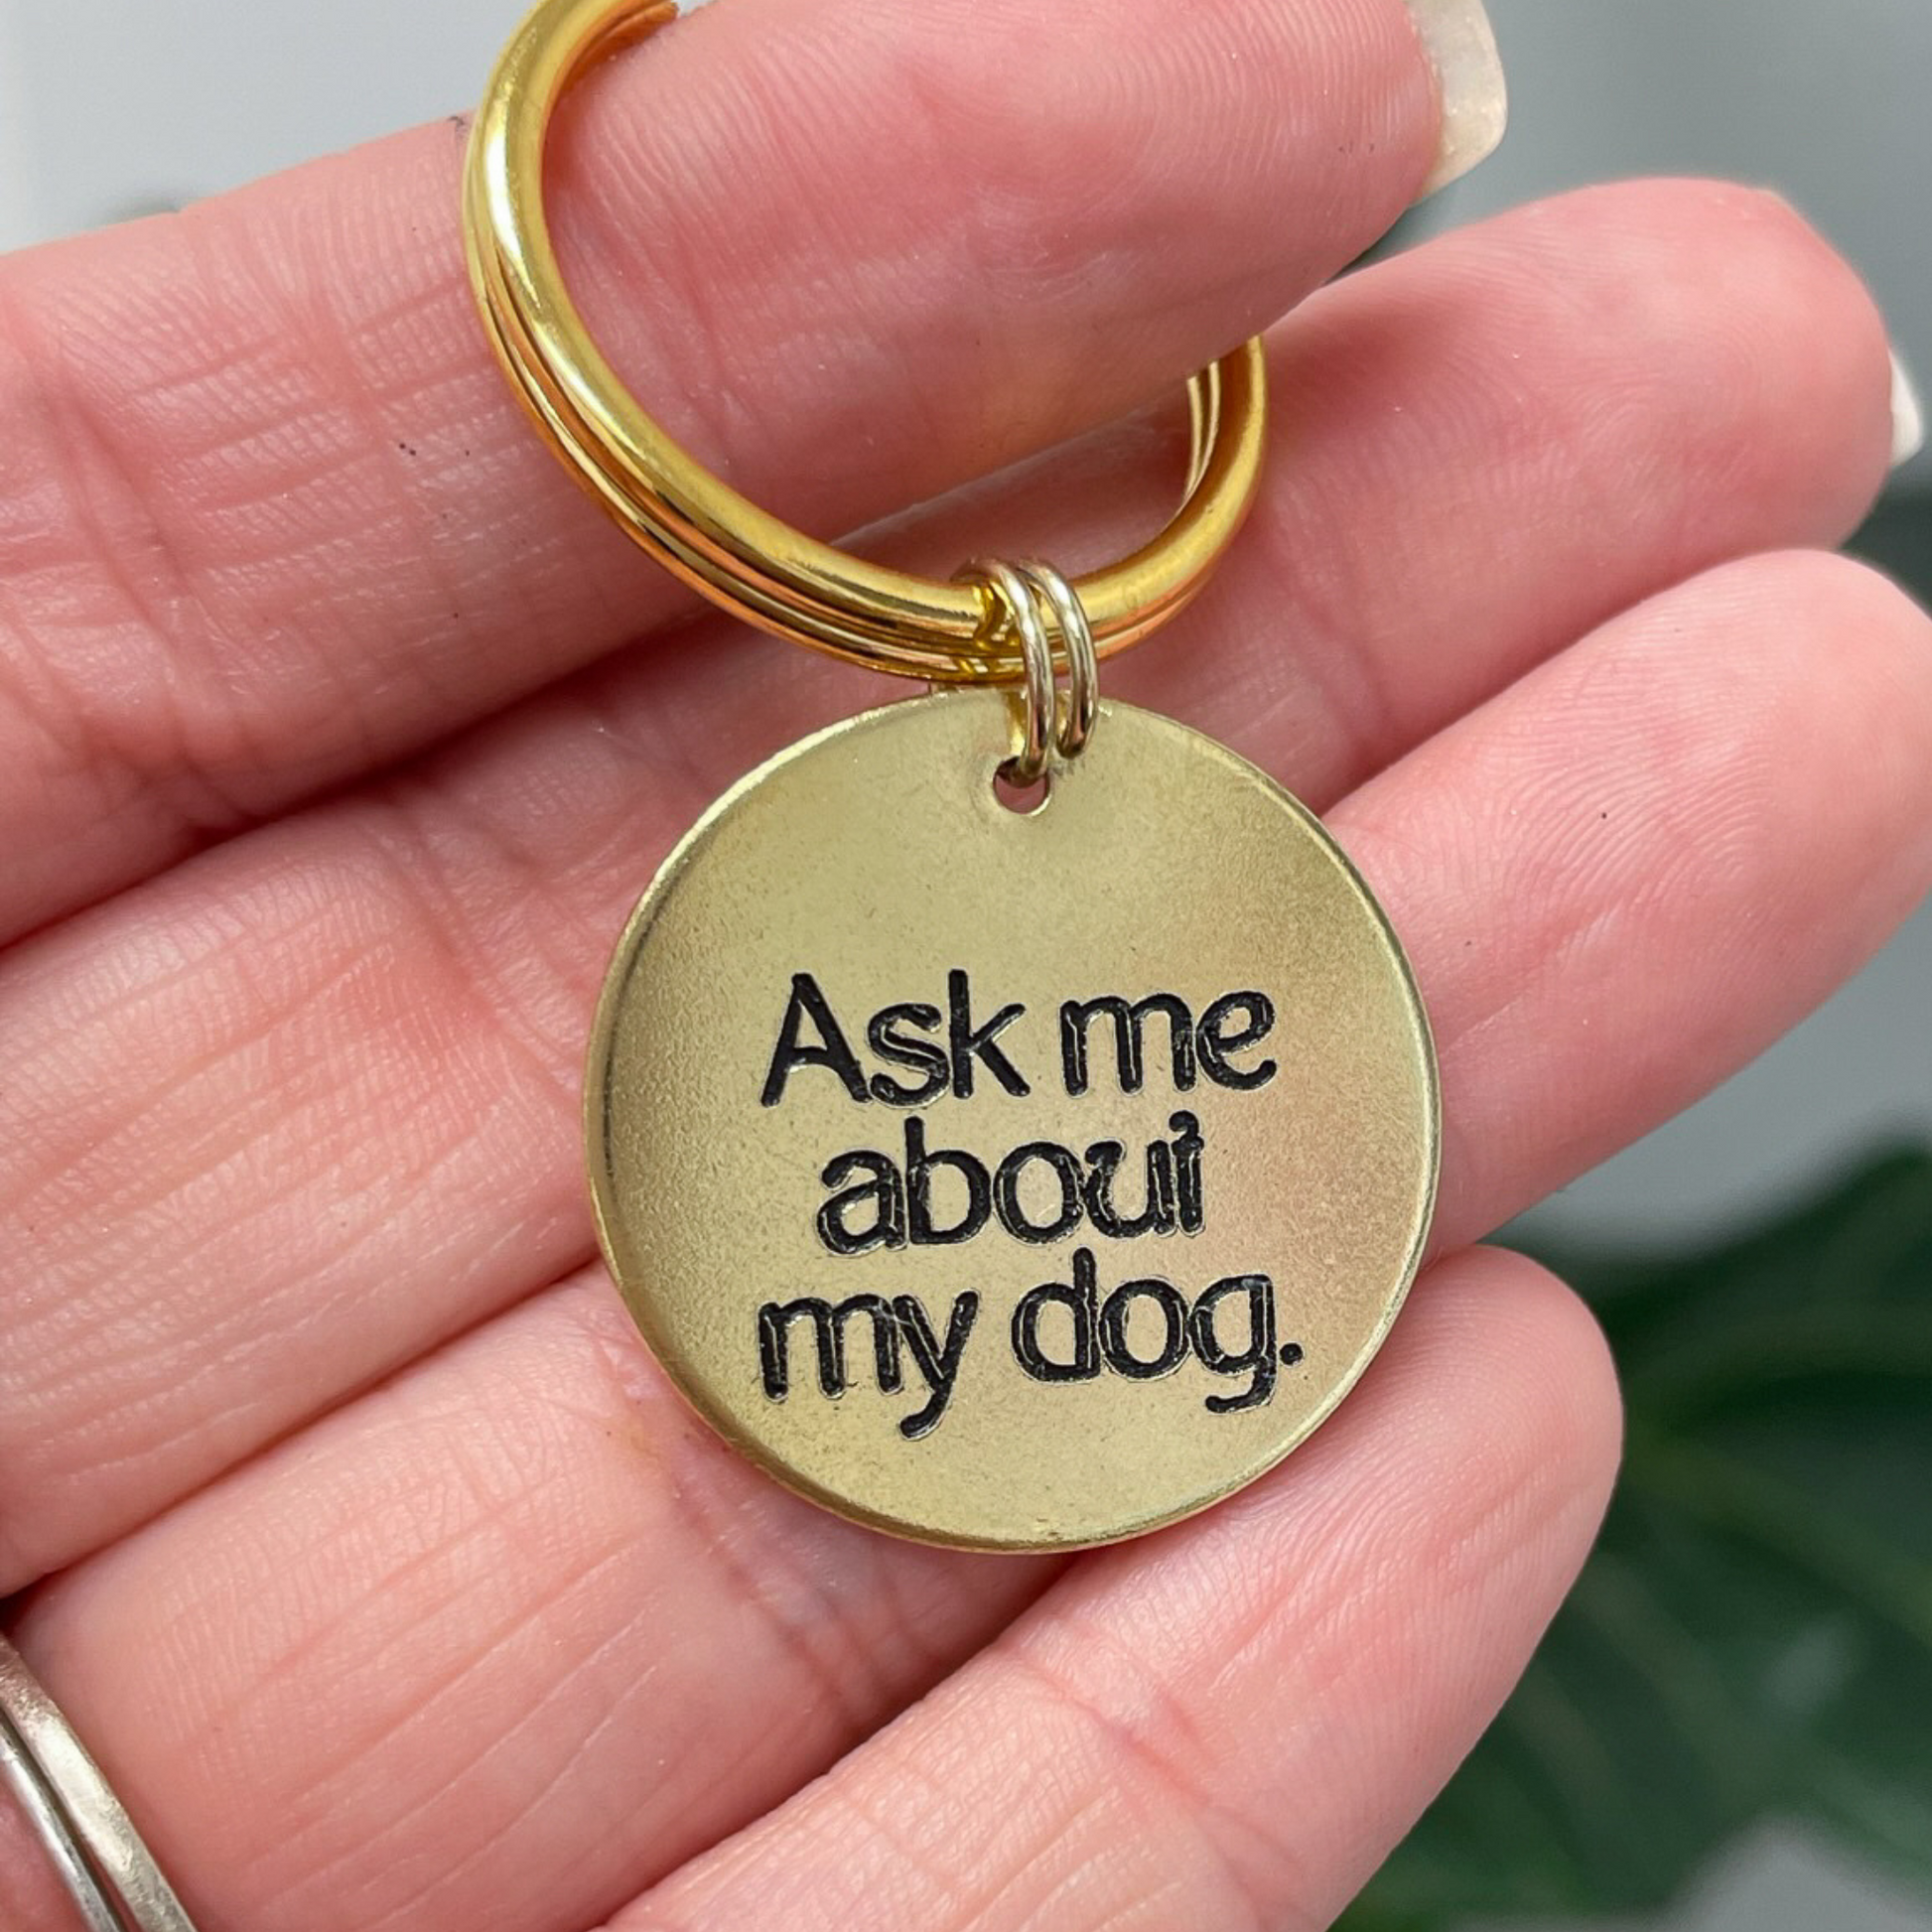 Ask Me About My Dog Keychain - Engraved - Dog Mom Gift - Gift for Her - Pet Mom - Fur Mom - Gift for Couples - Unique Gift - Cute Keychain